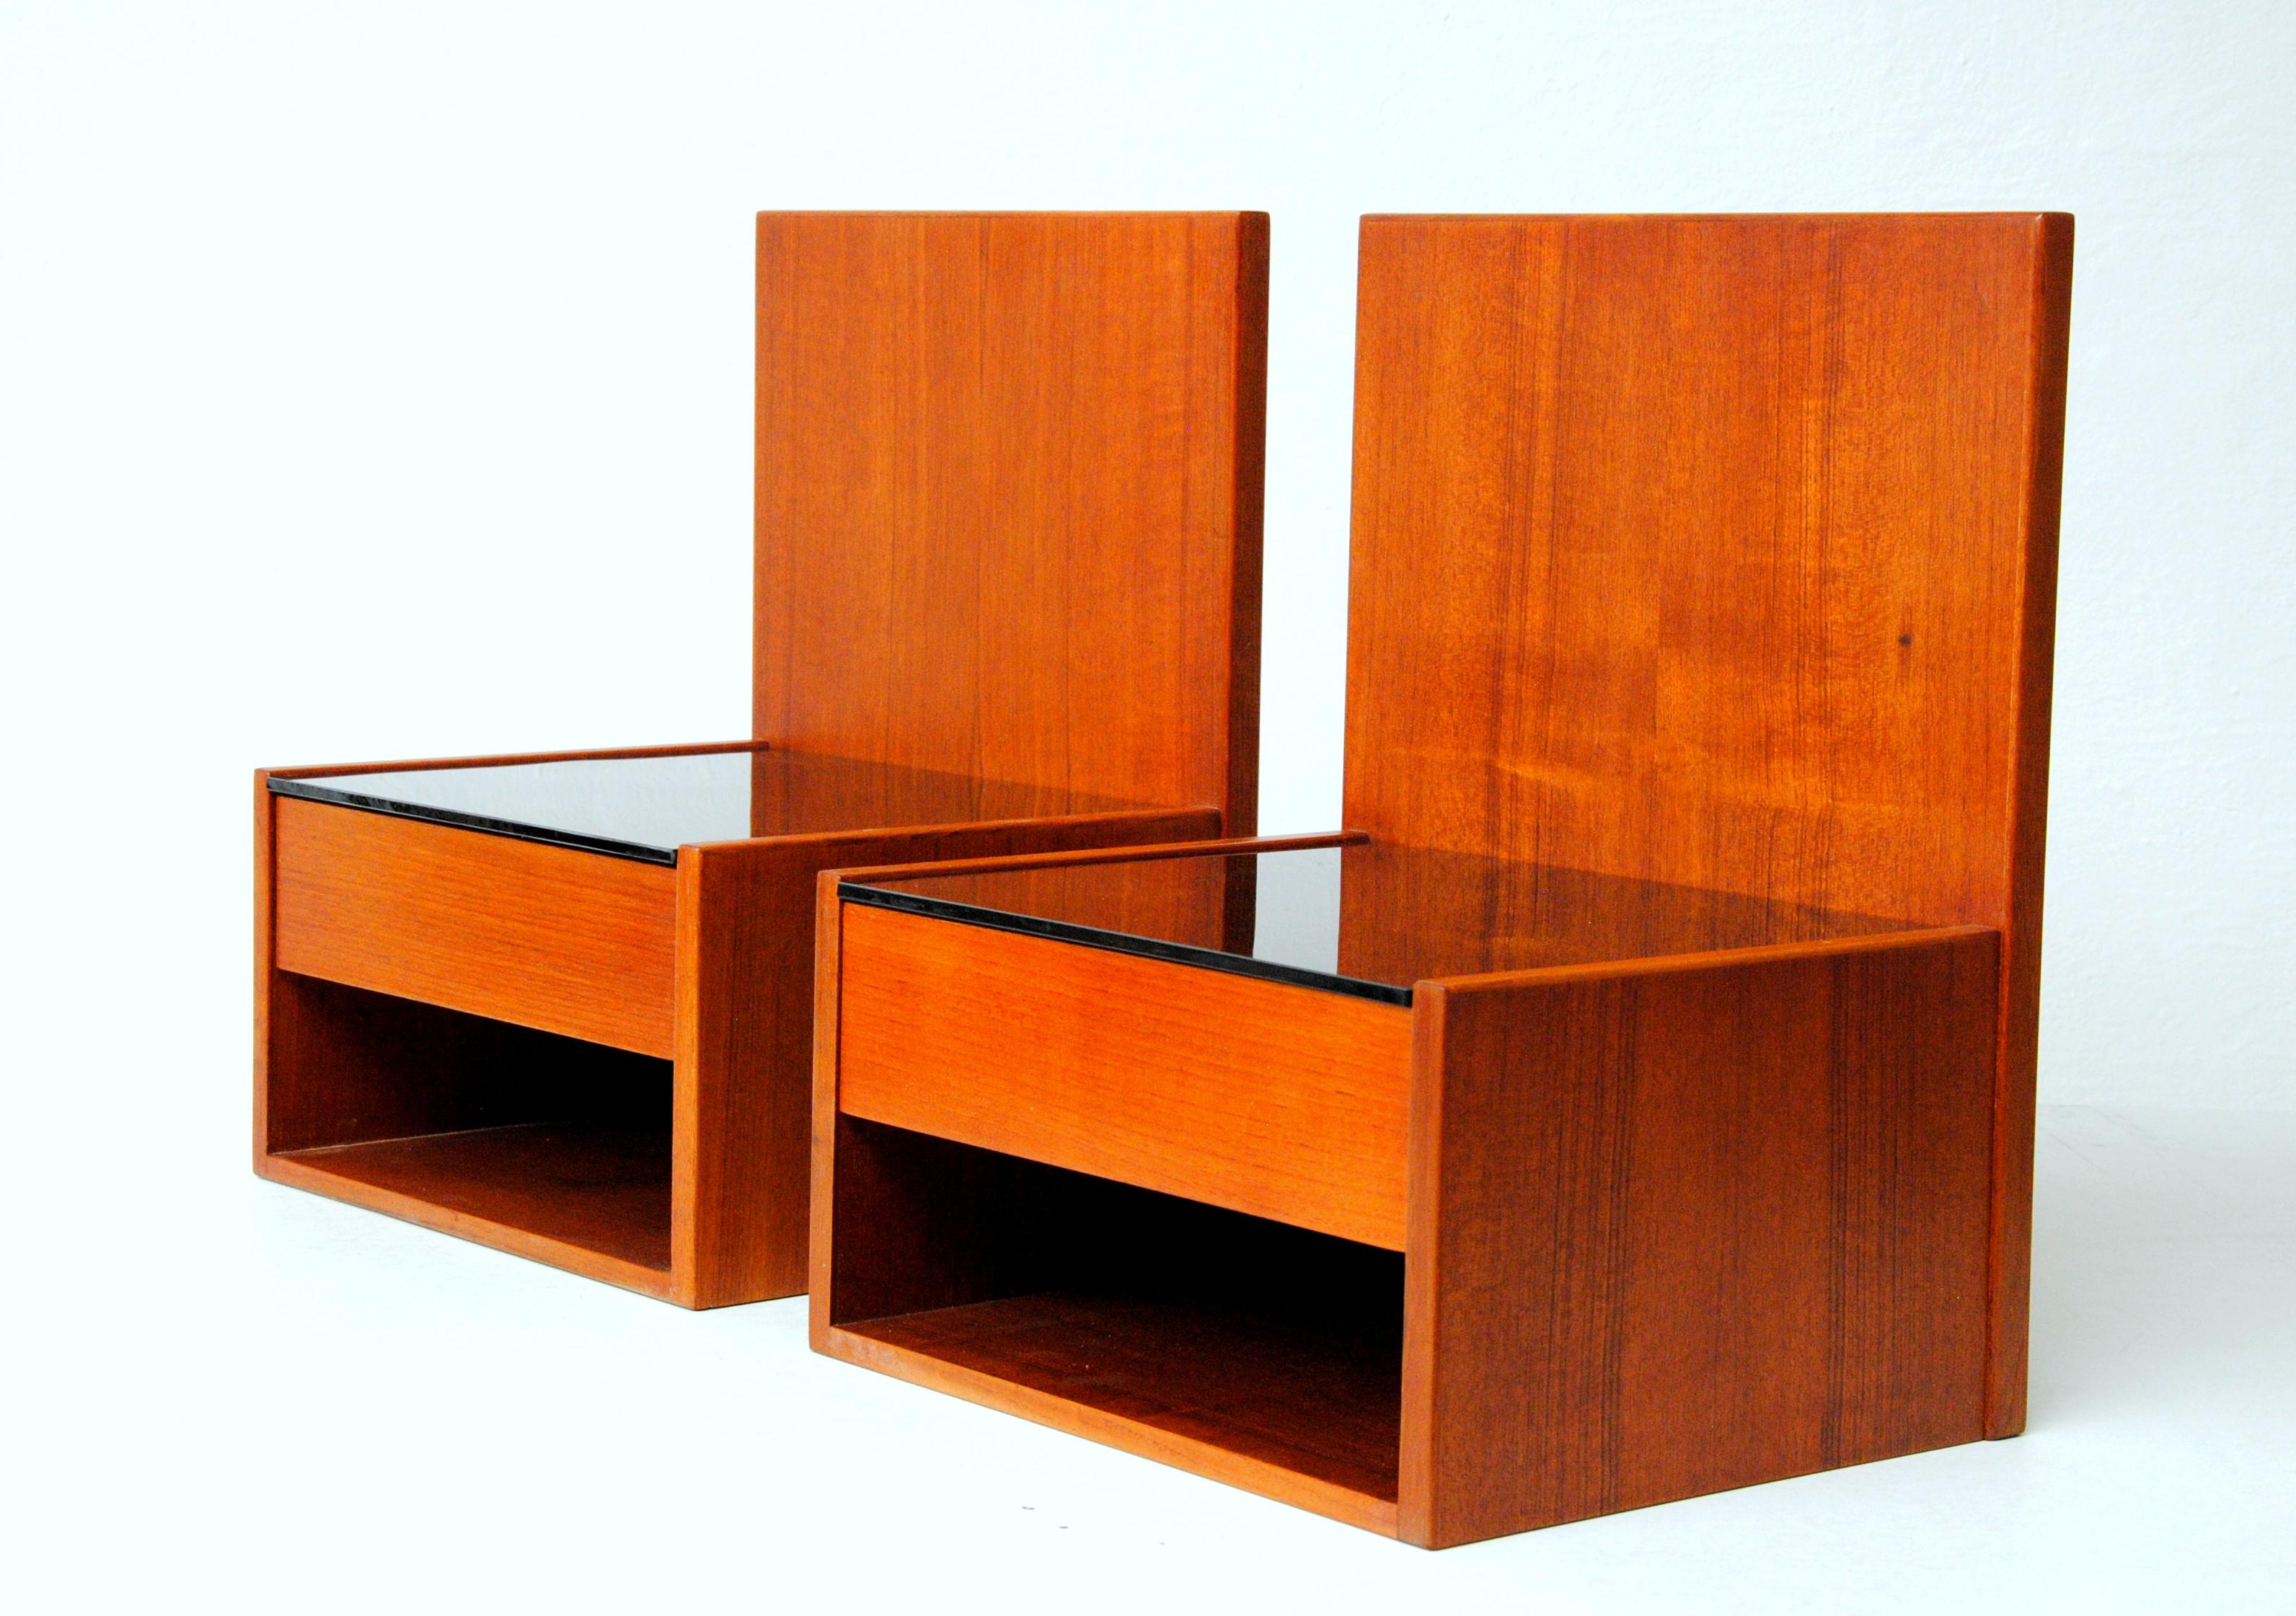 1960's Hans Wegner Set of two floating nightstands in teak with glass for Getama.

The set of floating night stands or shelves in teak, each festure a single drawer, open storage compartment beneath and a black glass table top surface, designed by